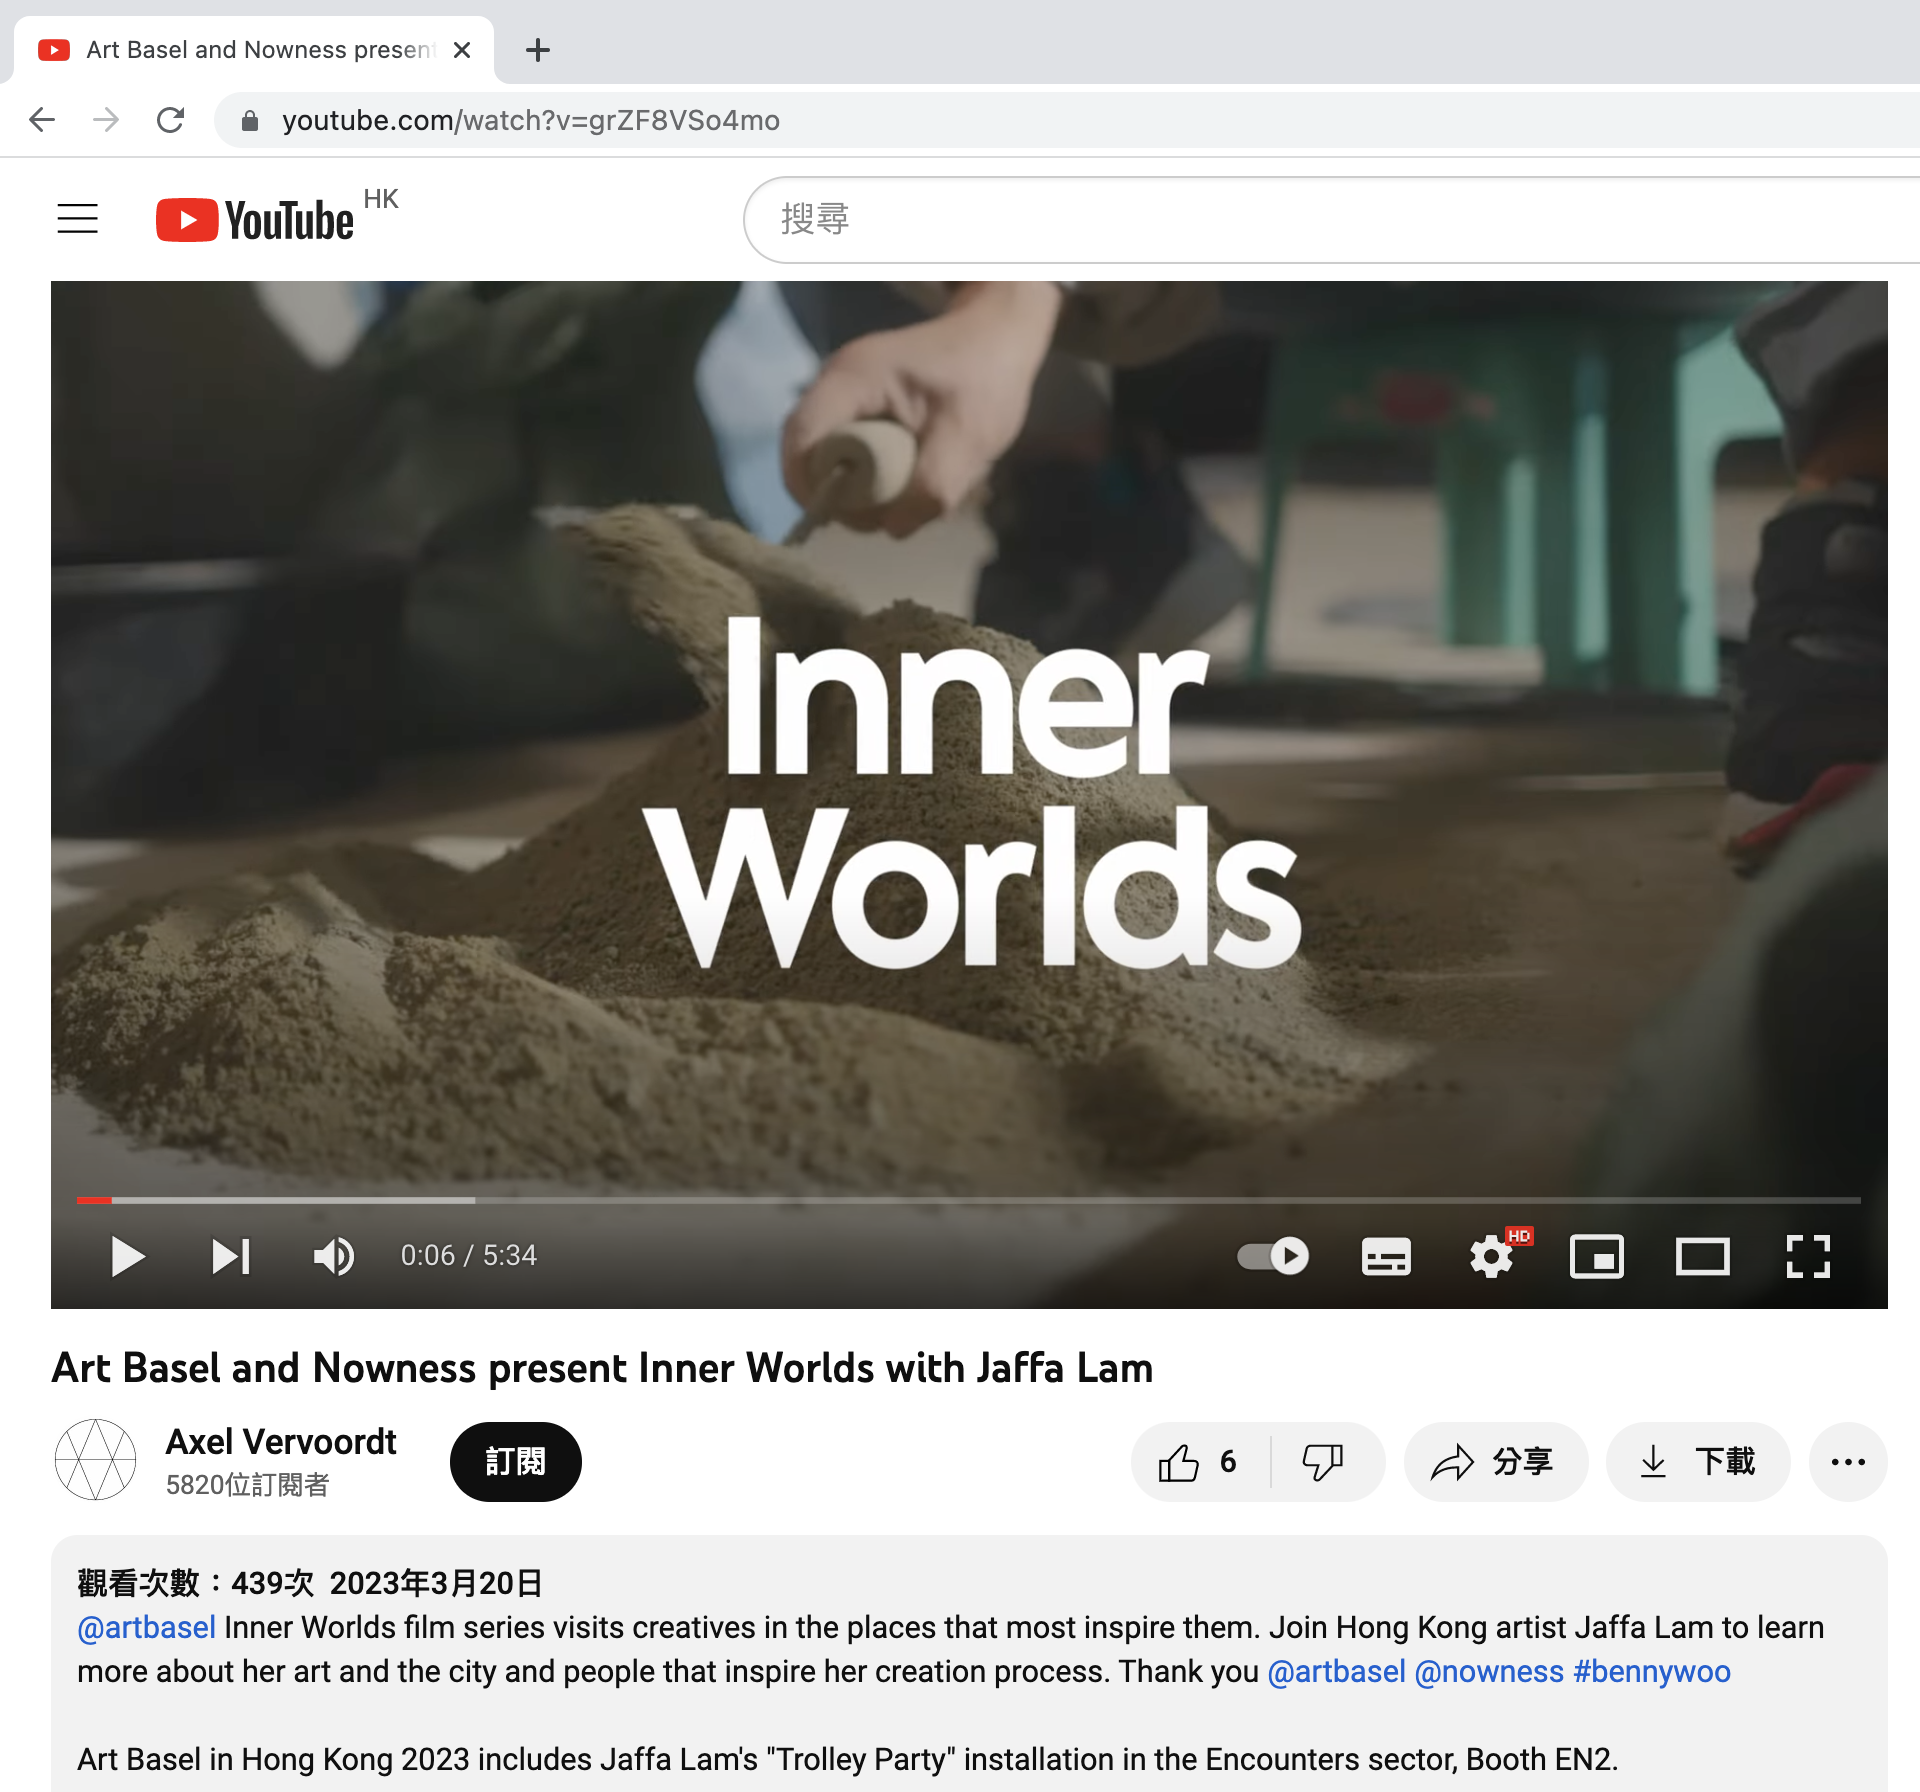 Art Basel and Nowness present Inner Worlds with Jaffa Lam